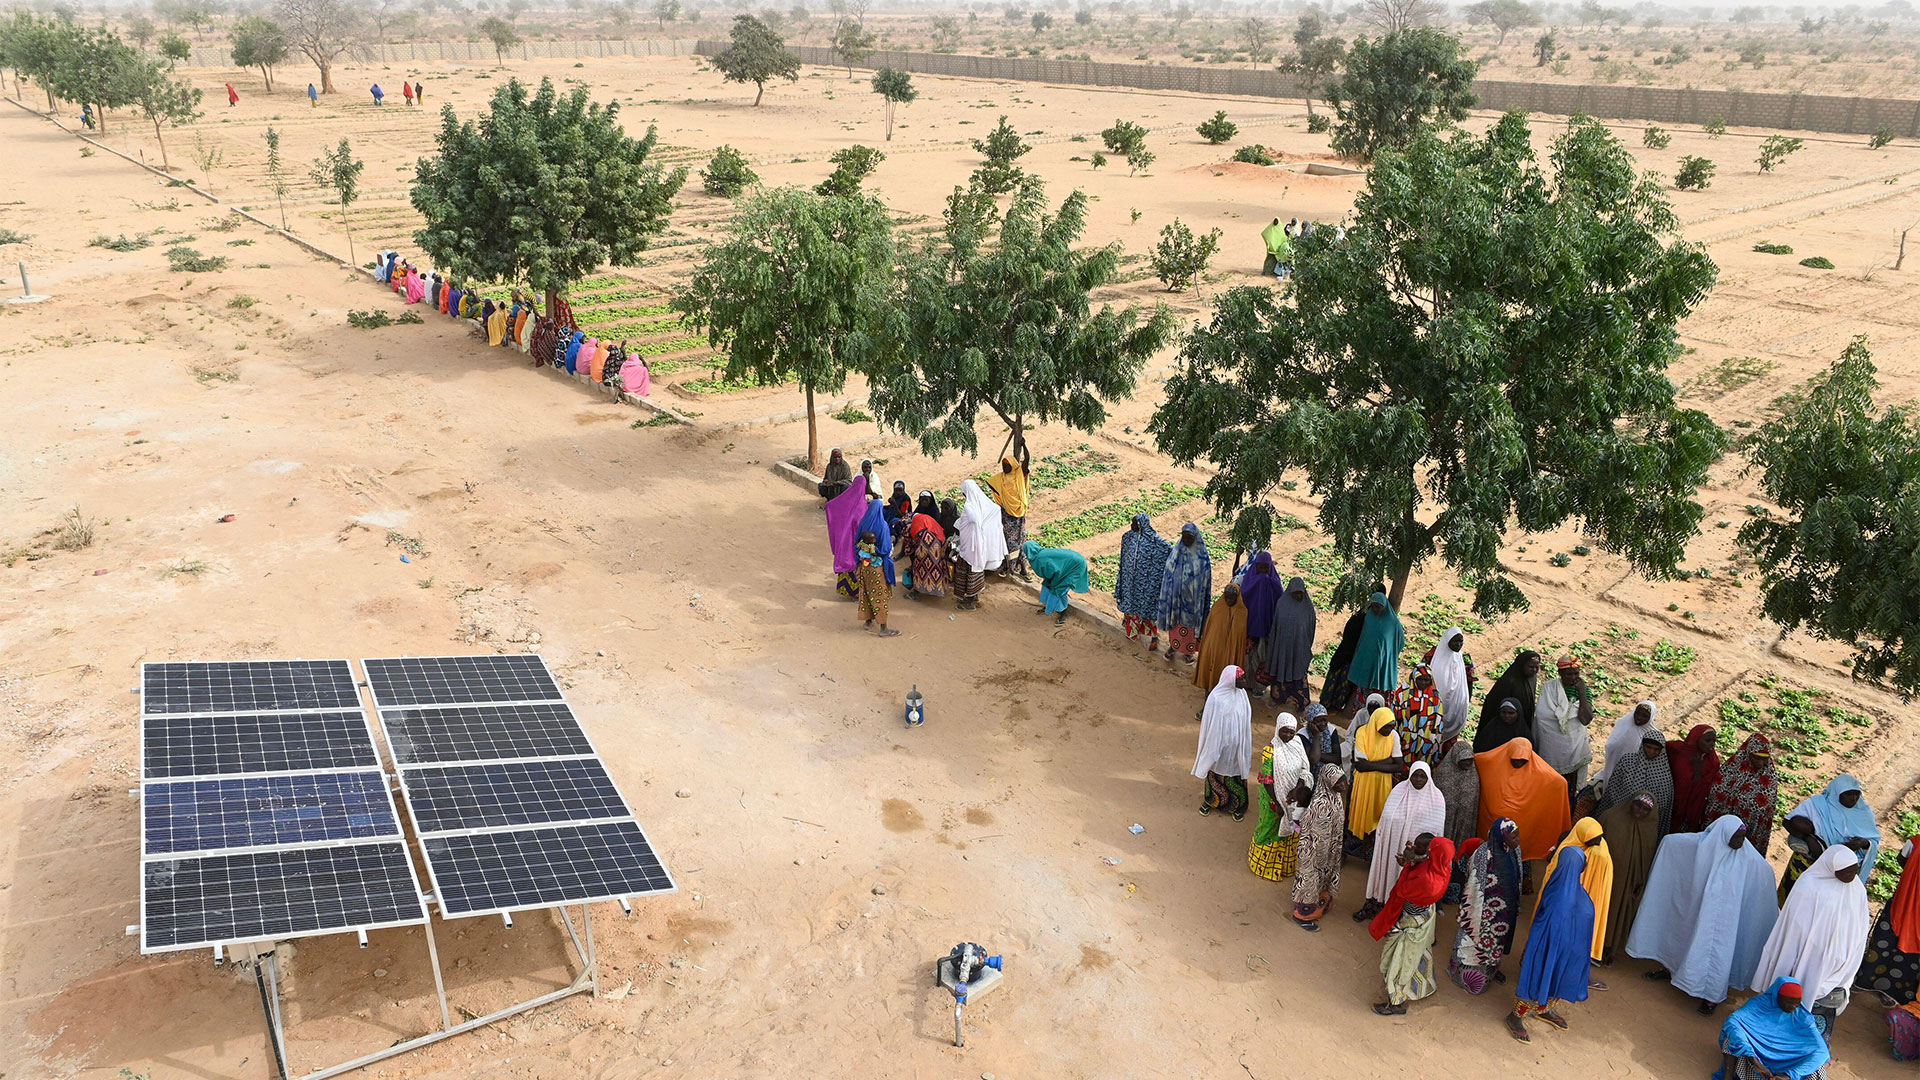 People in colorful clothing standing under trees near a solar panel